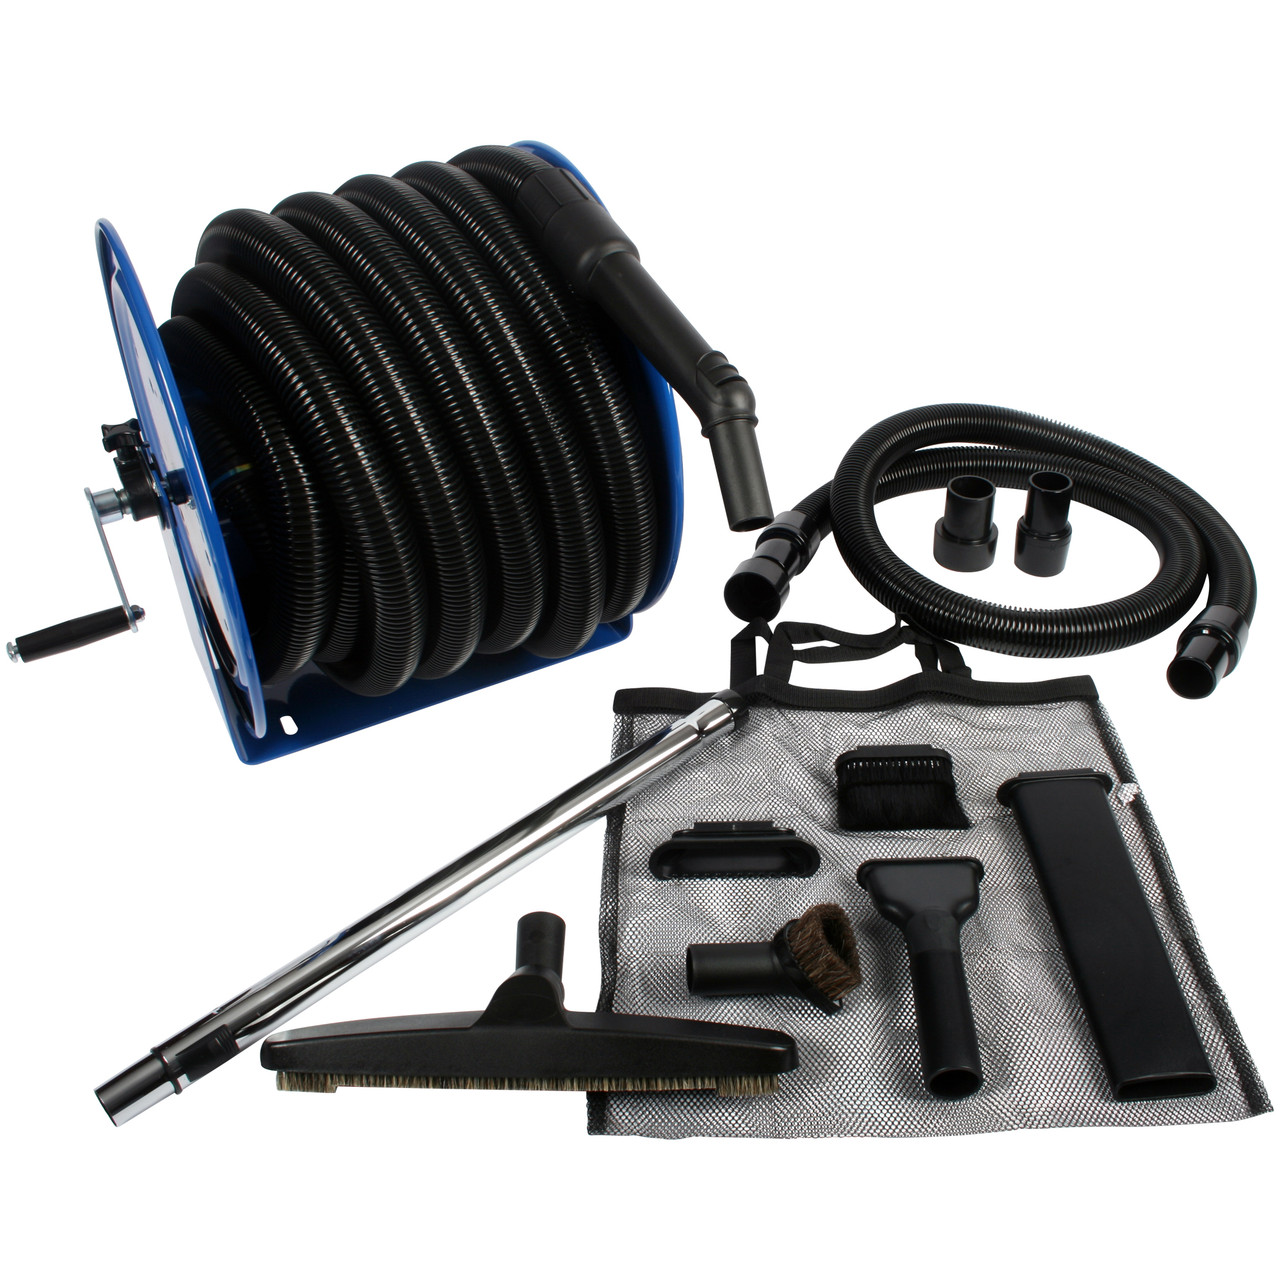 Industrial Grade Steel Hose Reel and Wet/Dry Vacuum Attachment Set